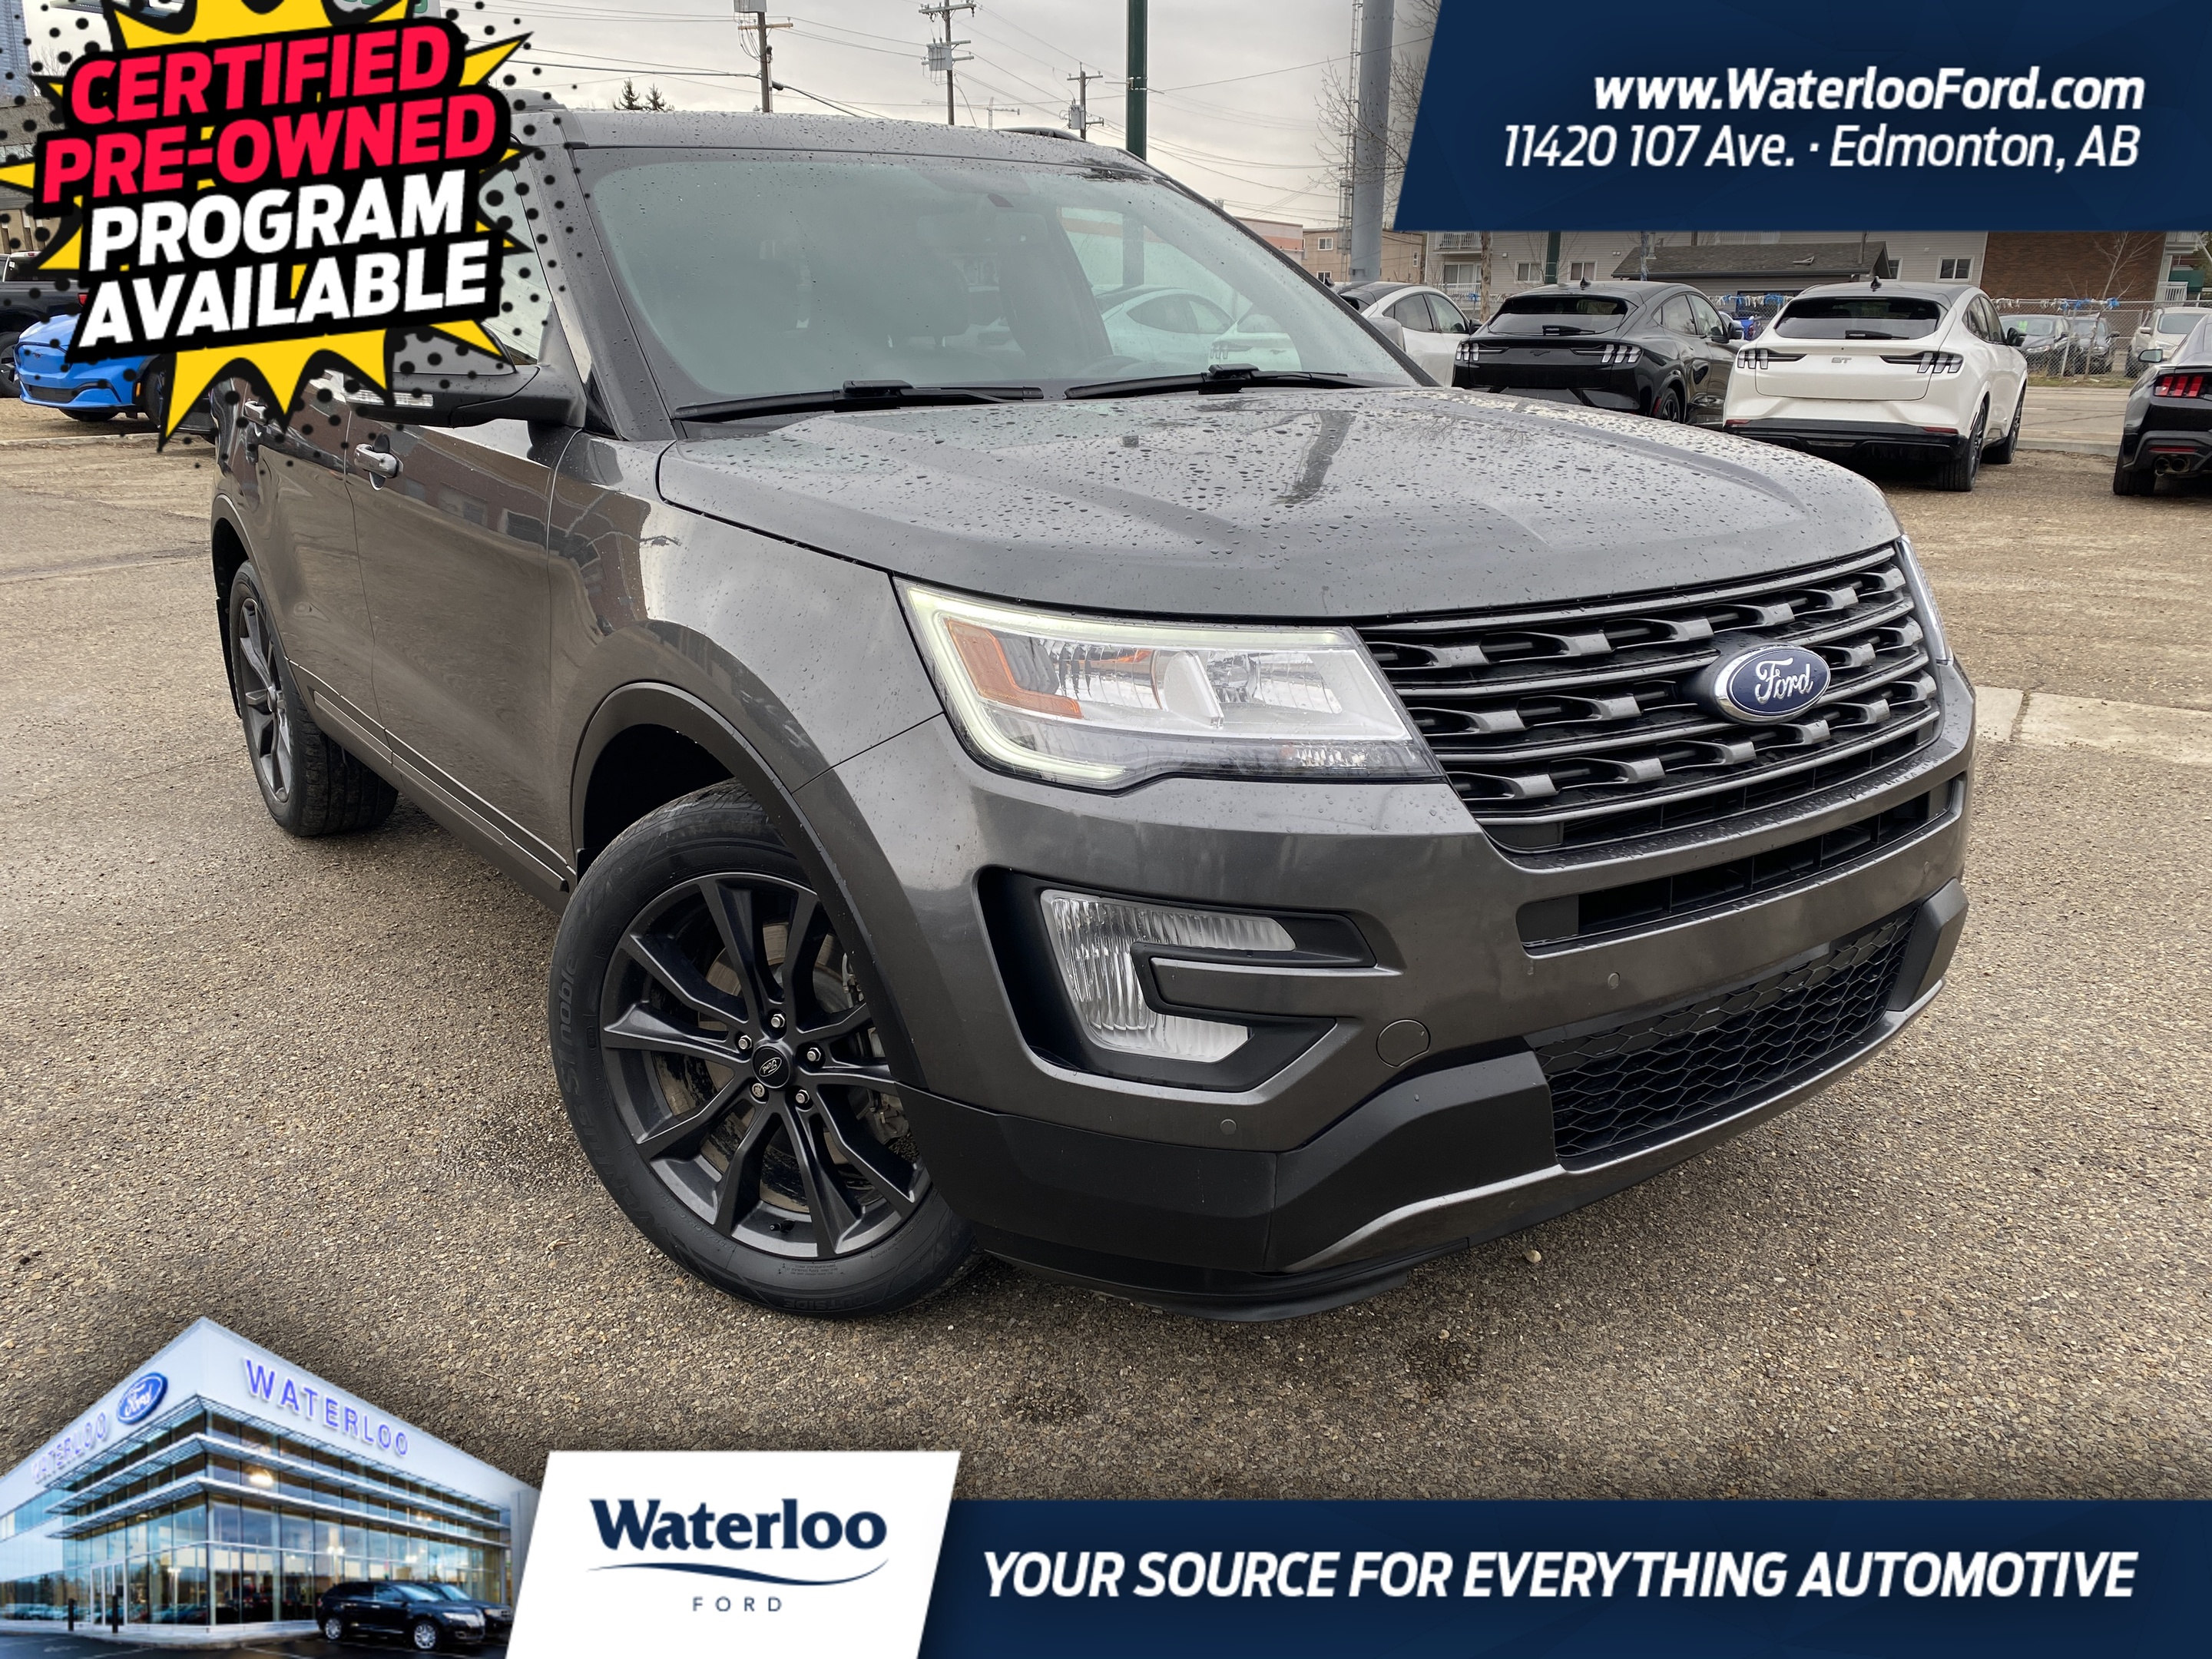 2017 Ford Explorer XLT | Twin Sunroof | Voice Nav | Heated Seats